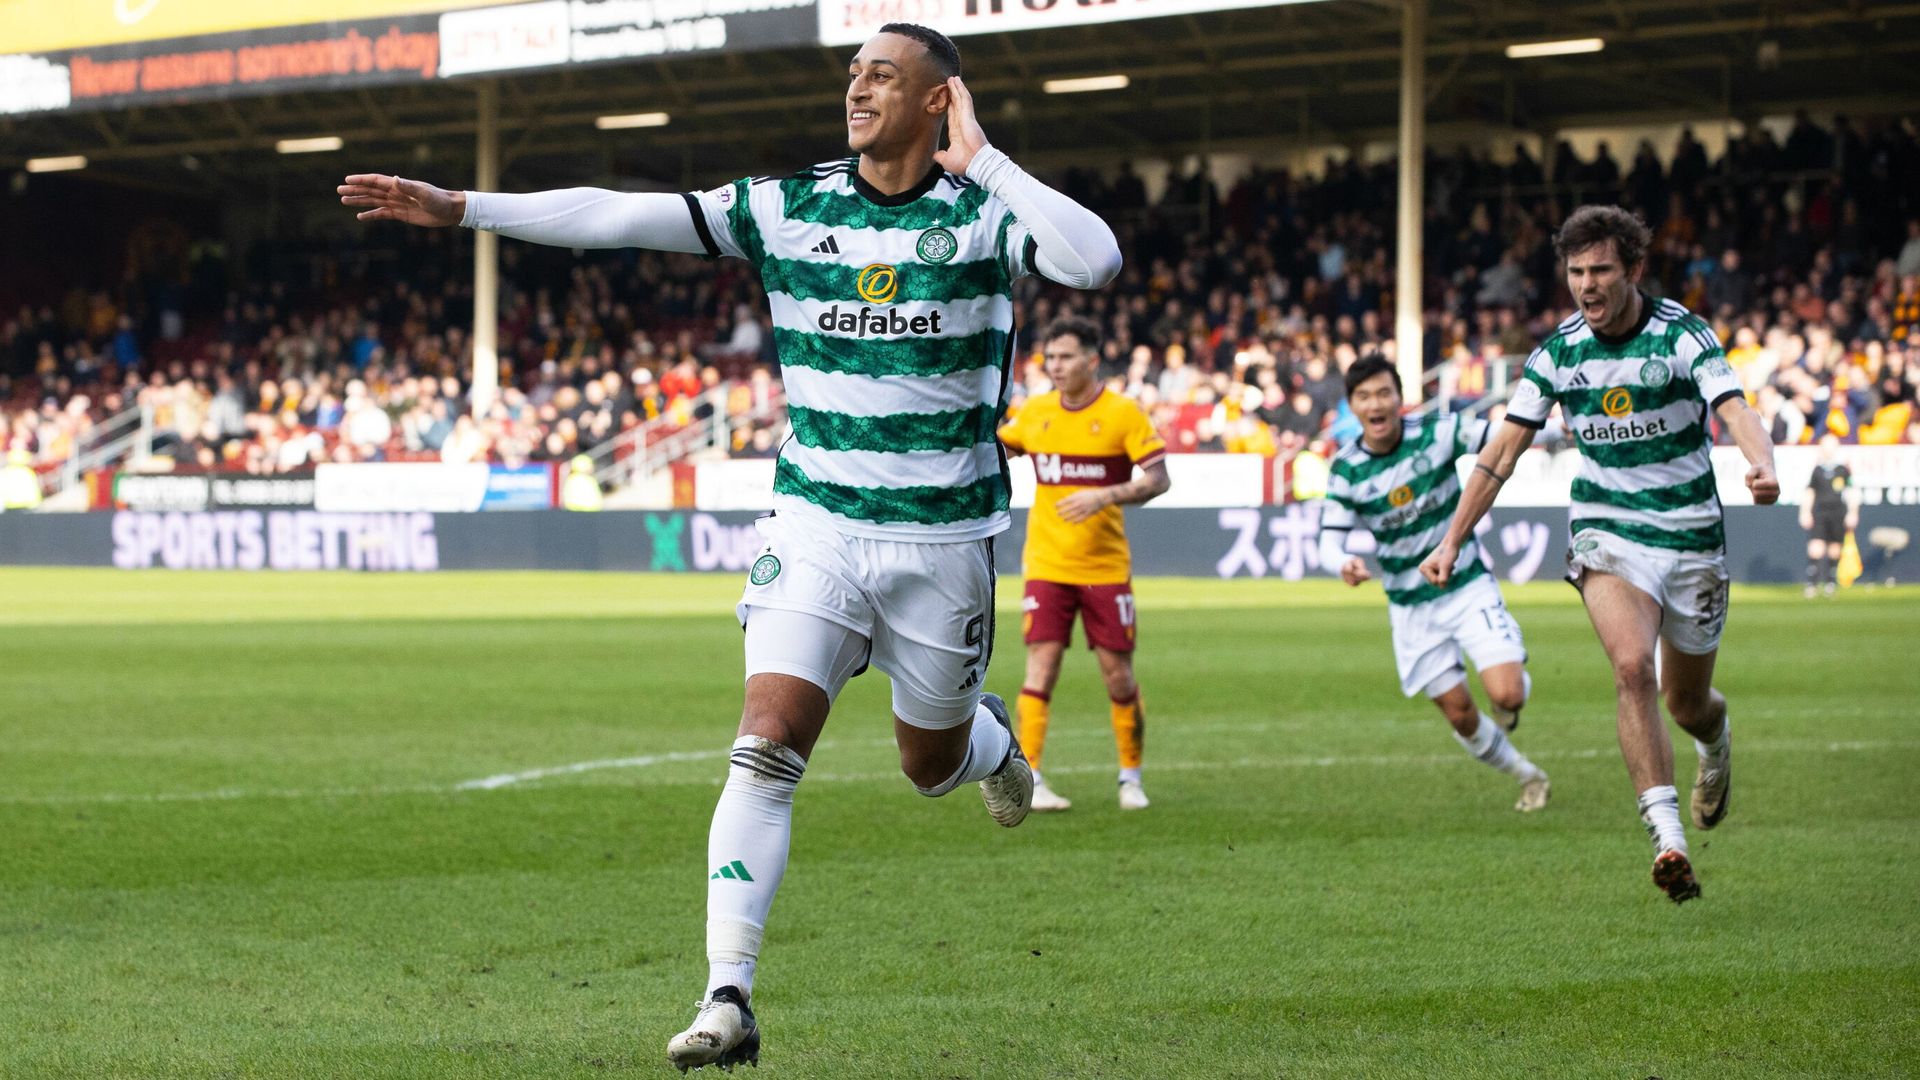 Celtic 'do it the hard way' to beat Motherwell and keep title hopes alive